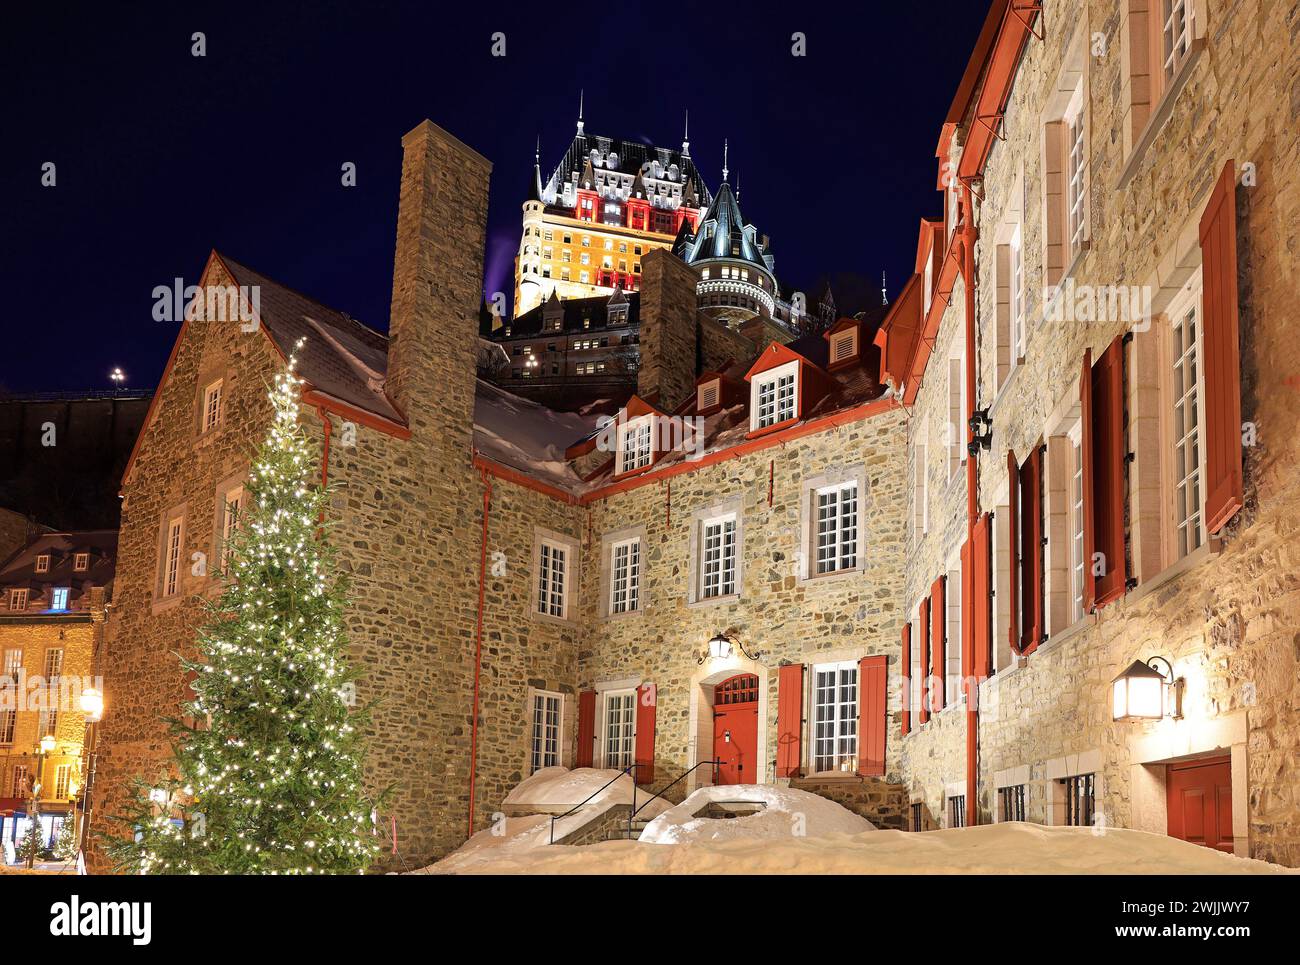 Maison Chevalier et Chateau Frontenac illuminated at dusk in winter, Quebec City Stock Photo